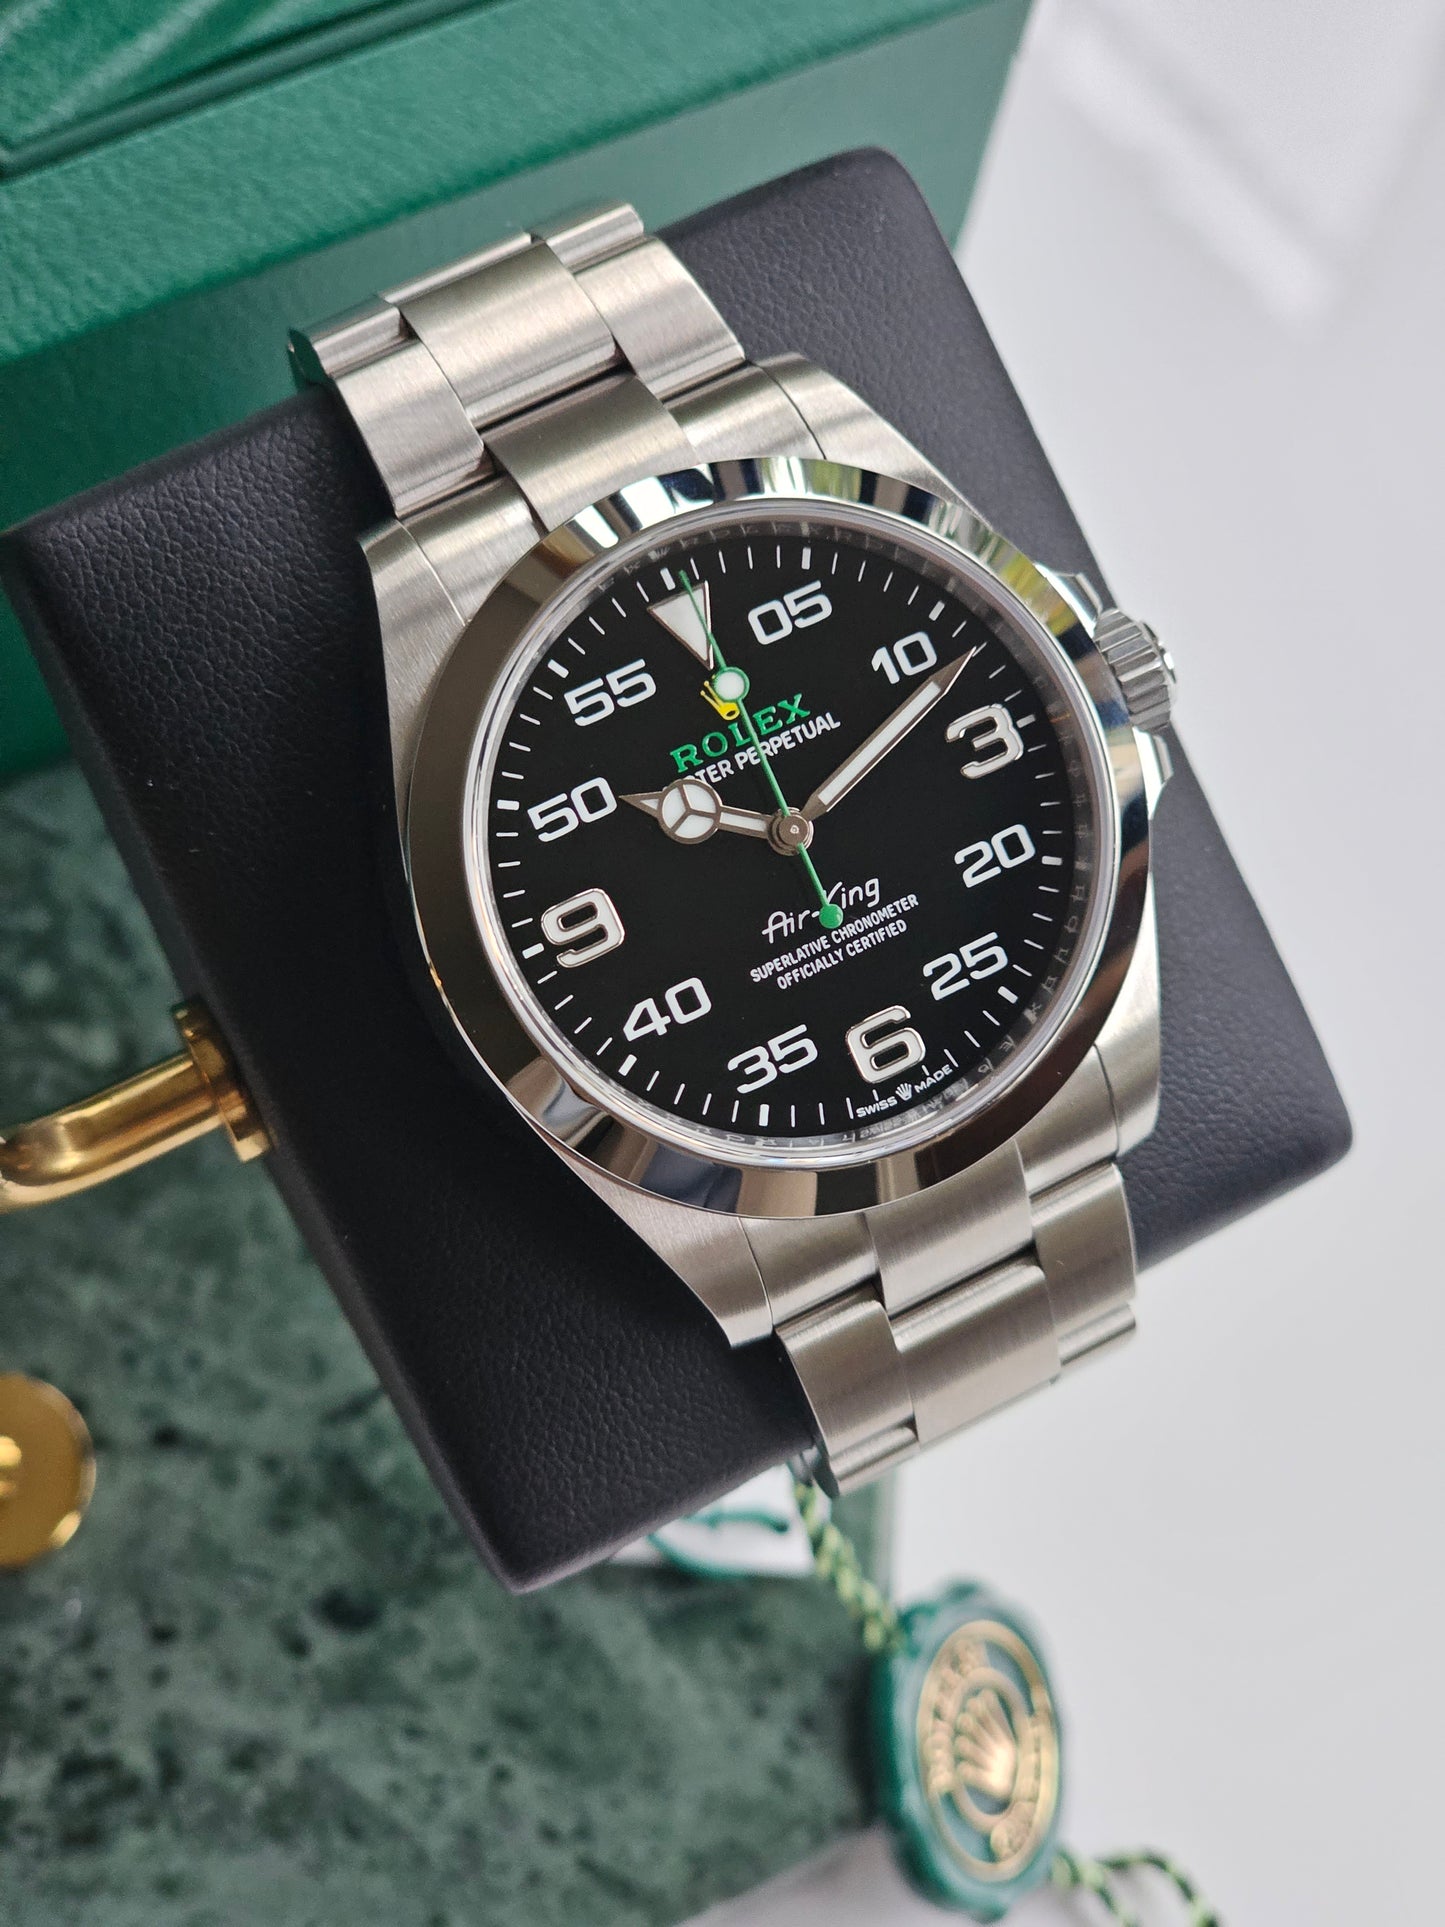 Rolex AirKing watch 126900, on a watch stand, time showing ten past ten. Watch angled to the left. Part of the green rolex box showing in the background